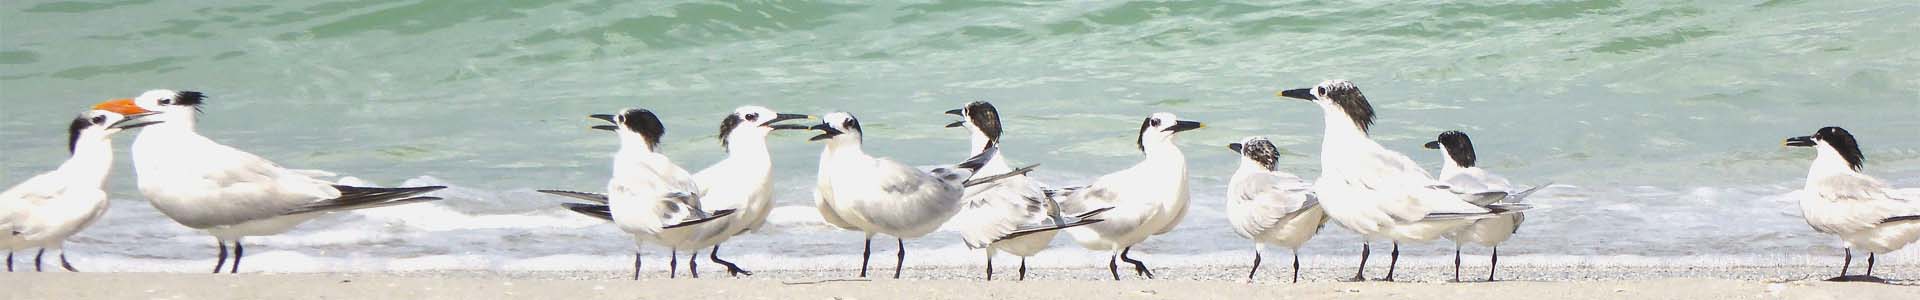 A group of terns on the beach